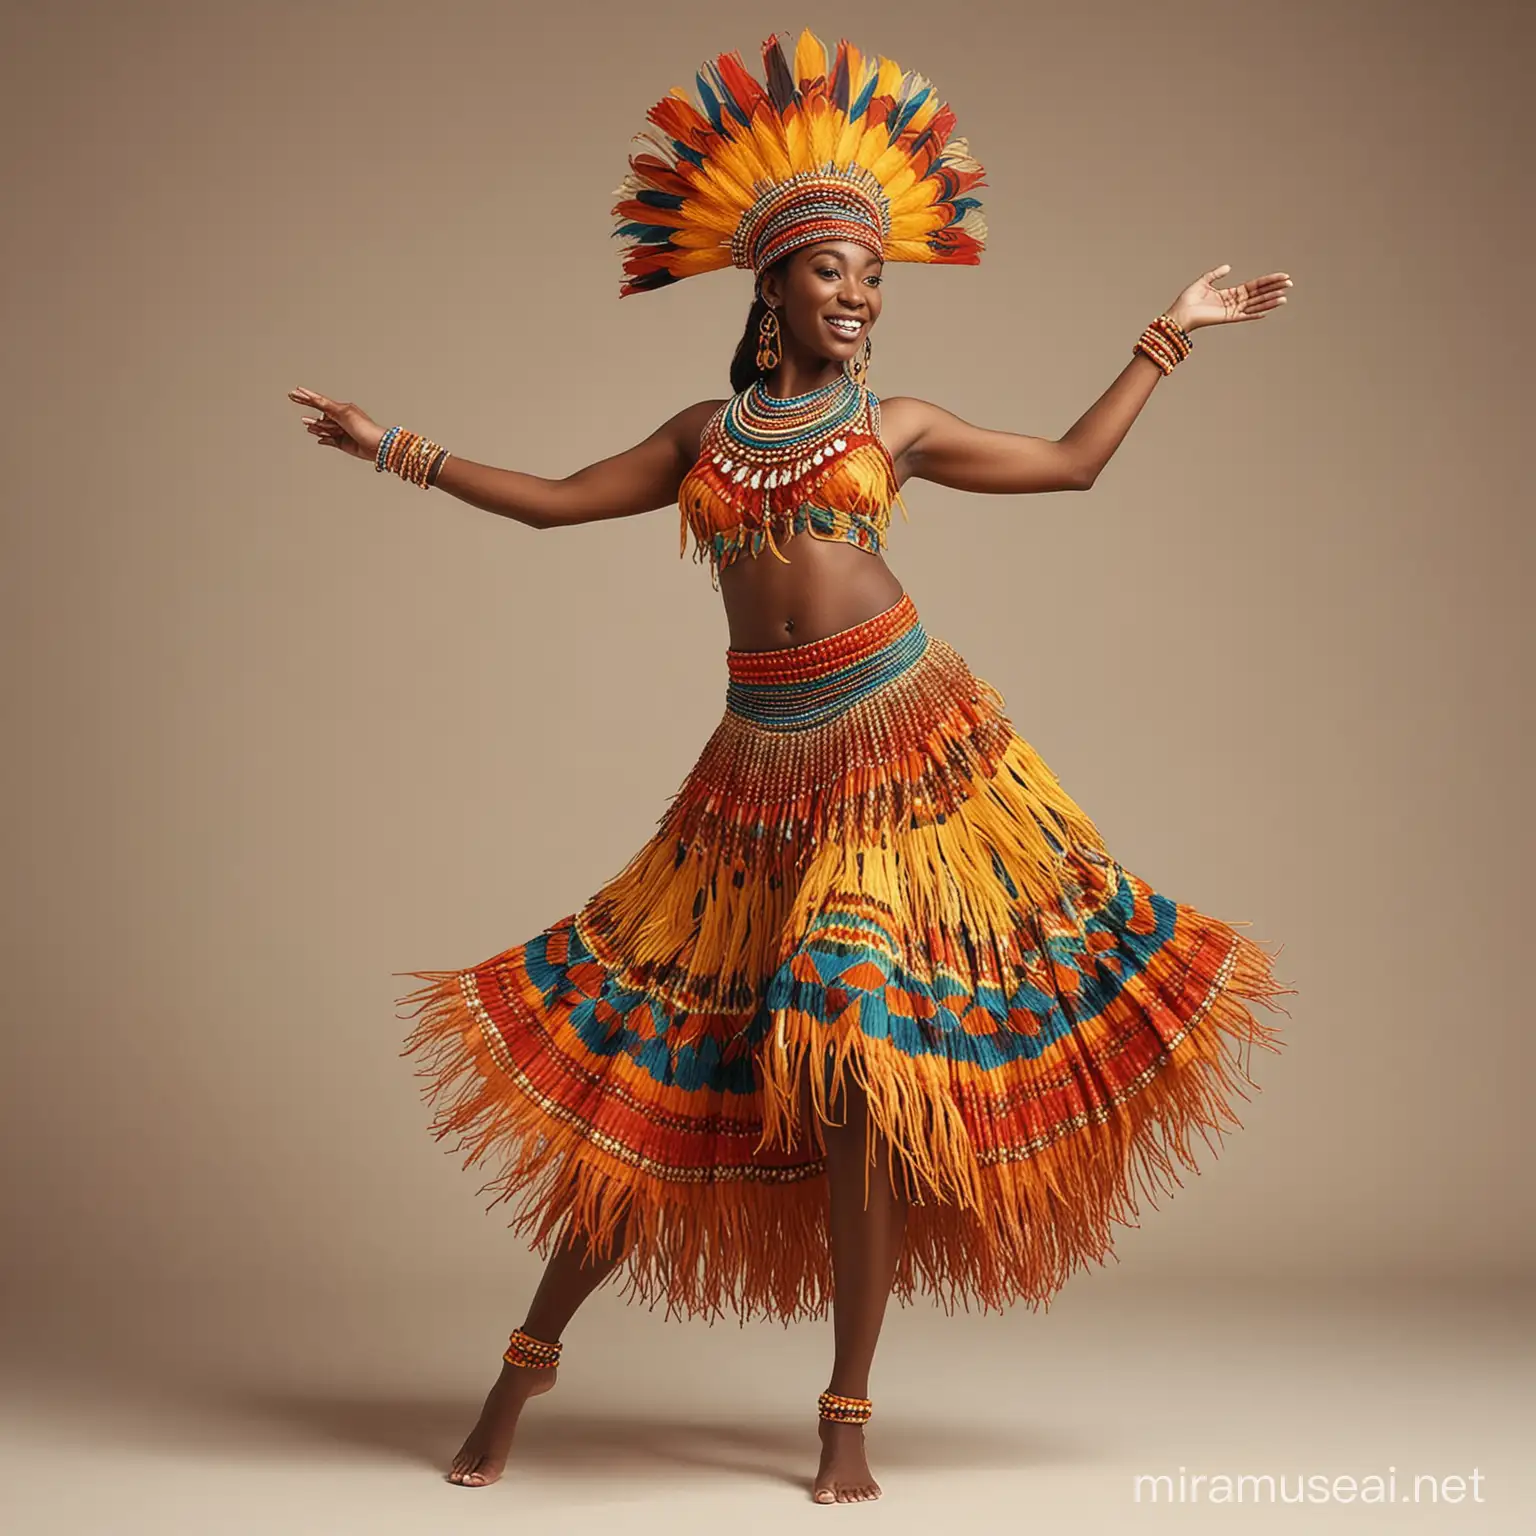 Create a stylized illustration of an African dancer in traditional attire. The dancer should be portrayed mid-performance with dynamic movement, captured in a moment of joyous expression. The costume is detailed with elaborate patterns, including geometric shapes and vibrant colors, such as reds, blues, greens, and yellows. The attire includes a grass skirt, feather headdress, and beaded necklaces. Accessories like bracelets and anklets add to the festive look. The dancer should be playing a traditional African drum, decorated with similar patterns as the costume. The background is a simple, flat color to make the figure stand out, and the style of the illustration is reminiscent of mid-century modern art with bold shapes and flat colors, 32k render, hyperrealistic, detailed.